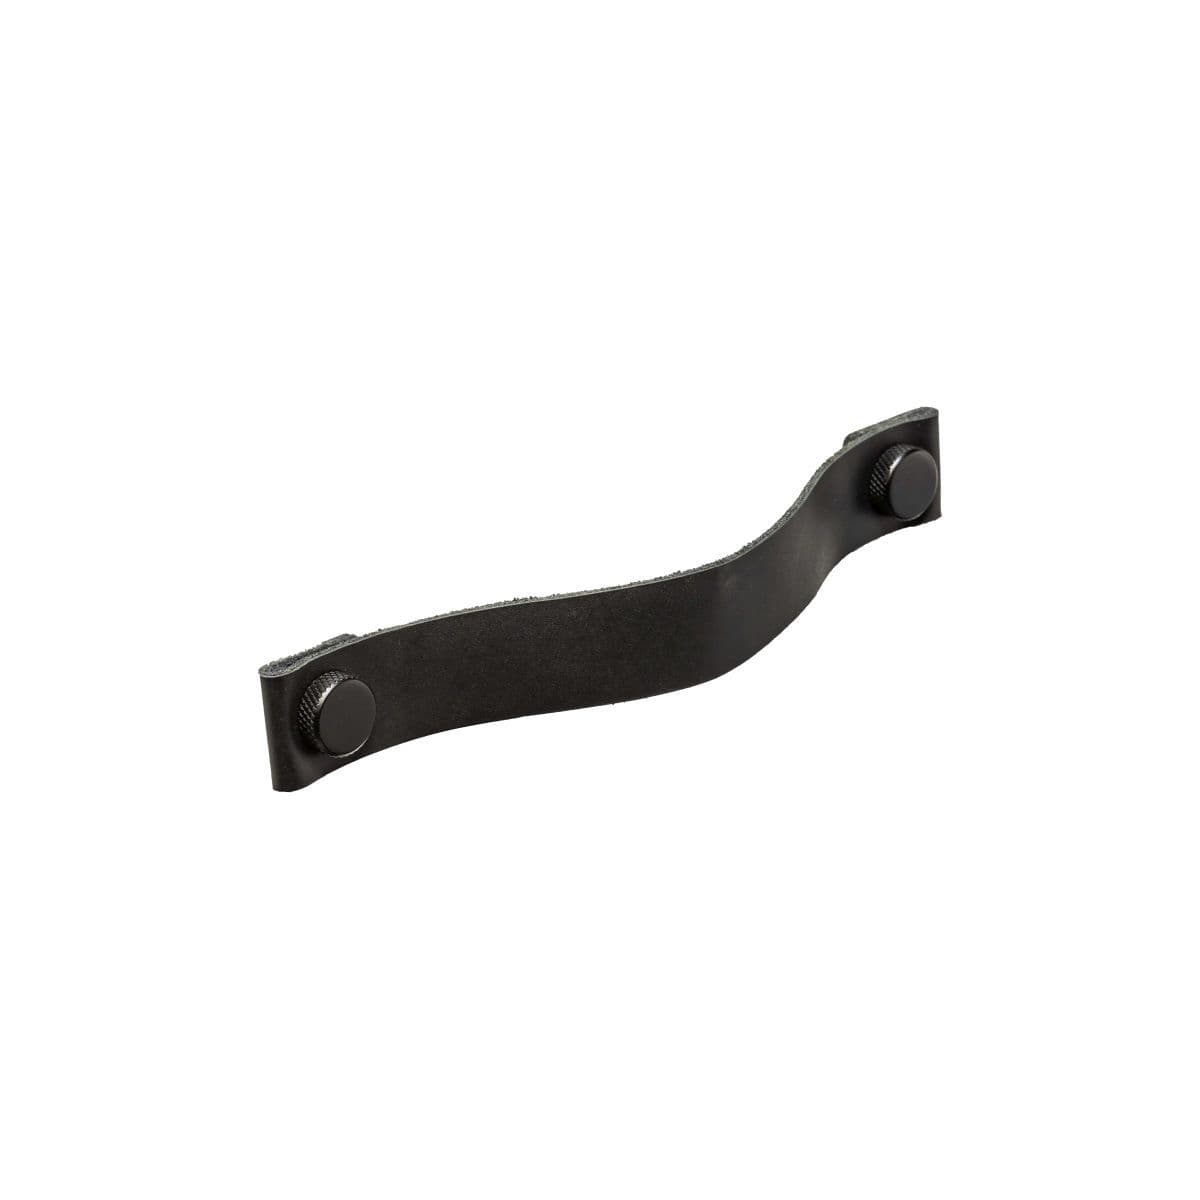 JEAKER STRAP Cupboard Handle - 160mm h/c size - BLACK or BROWN LEATHER finishes (PWS H1150.160)